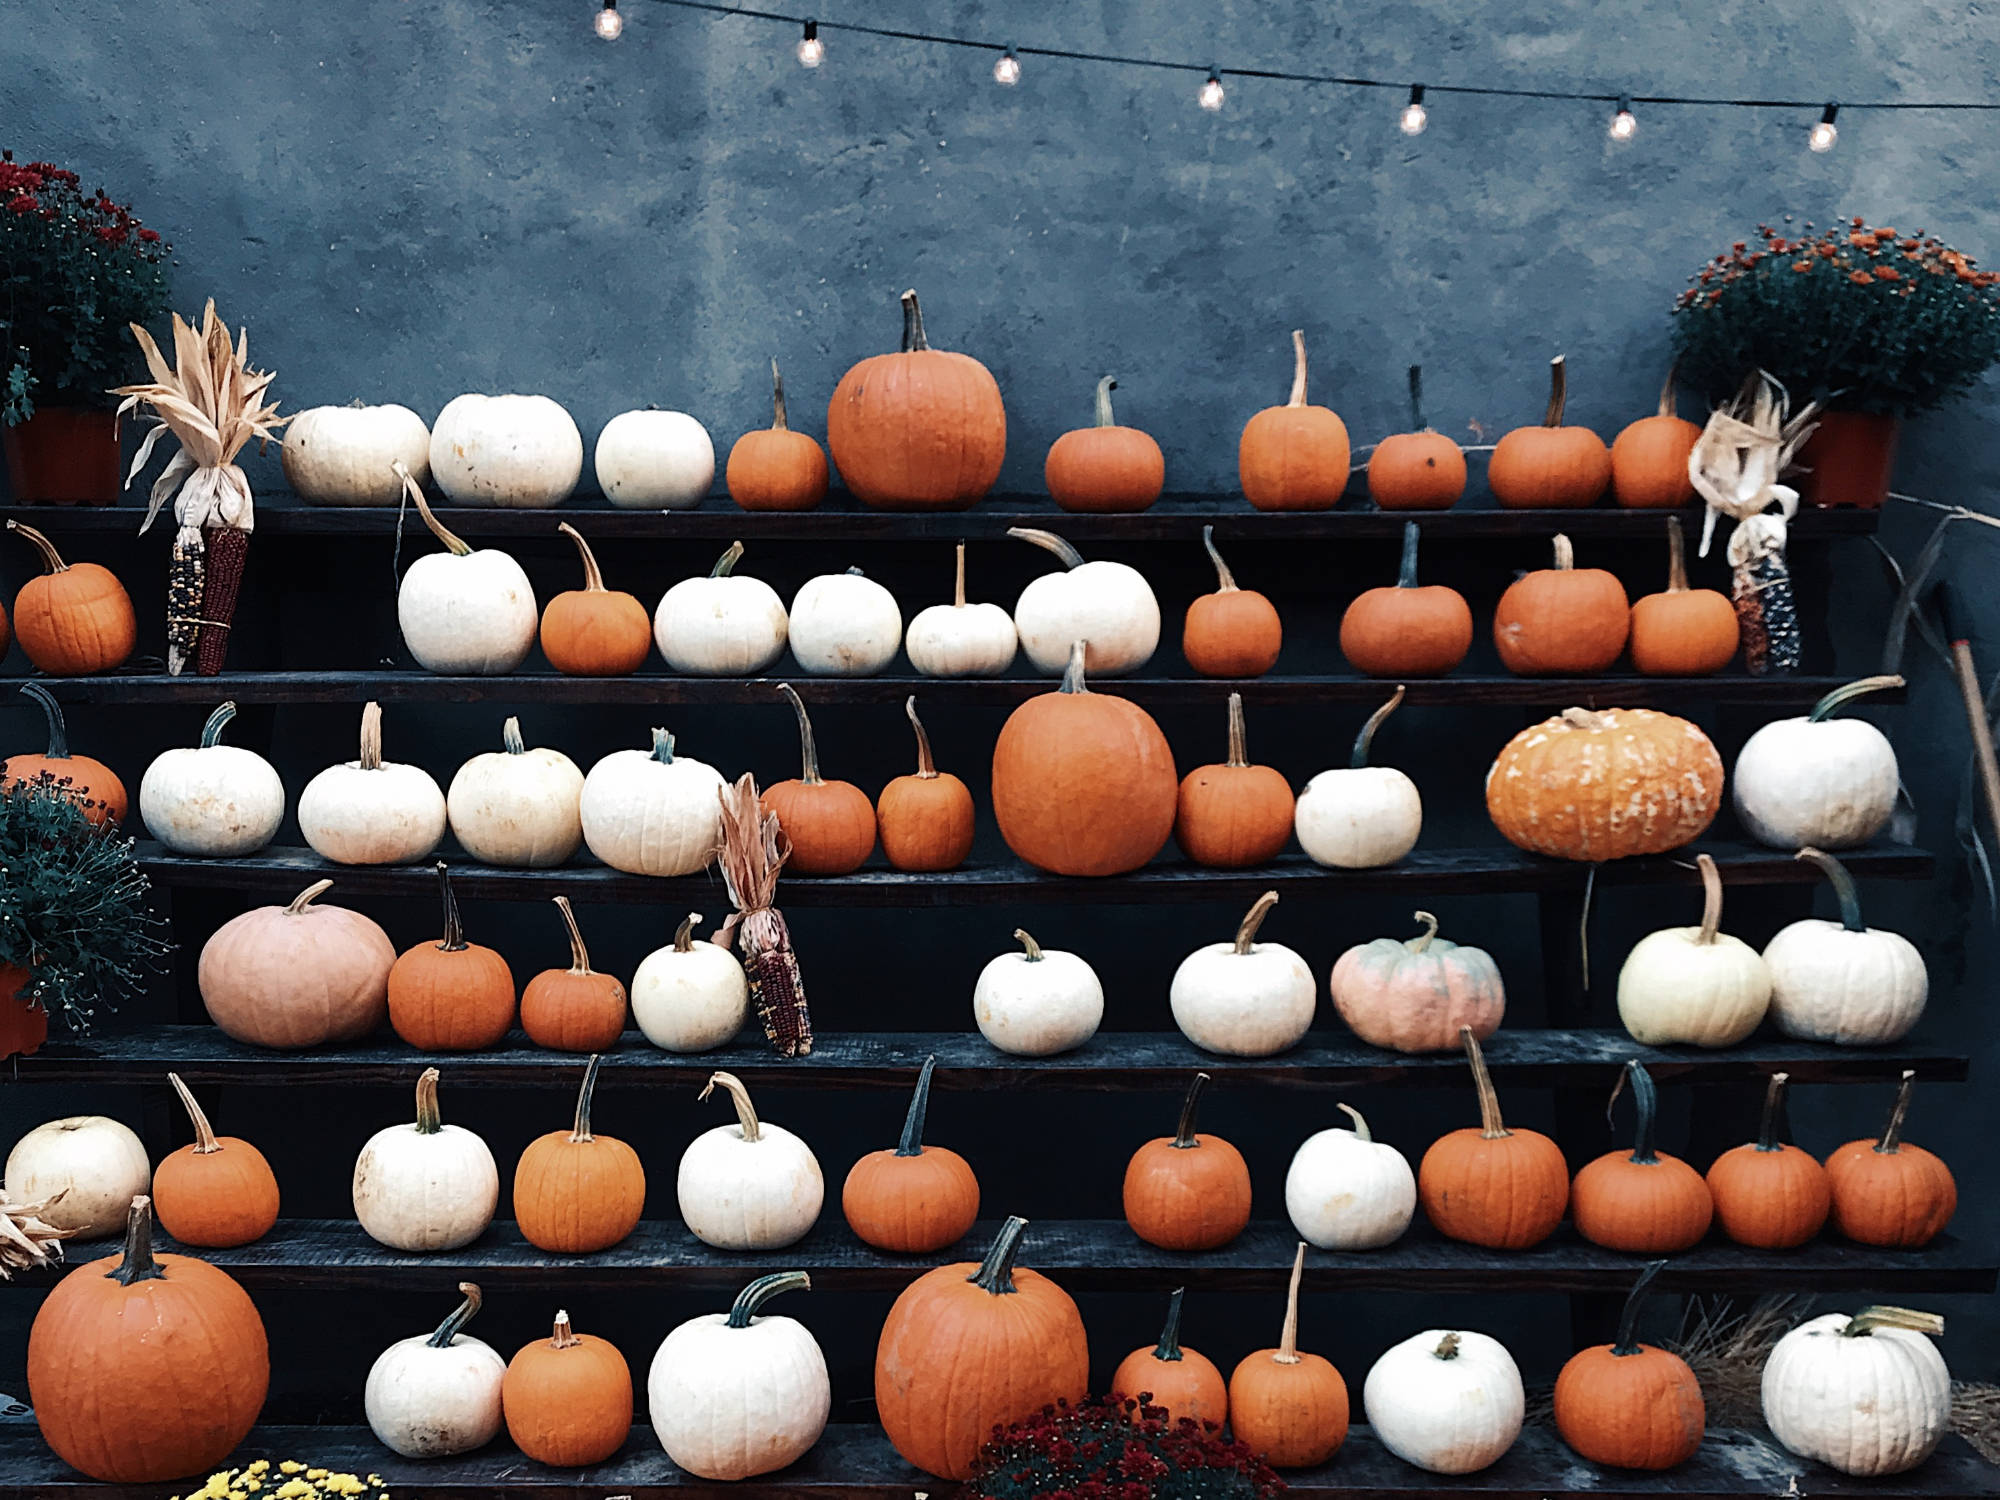 Rows of white and orange pumpkins against a wall